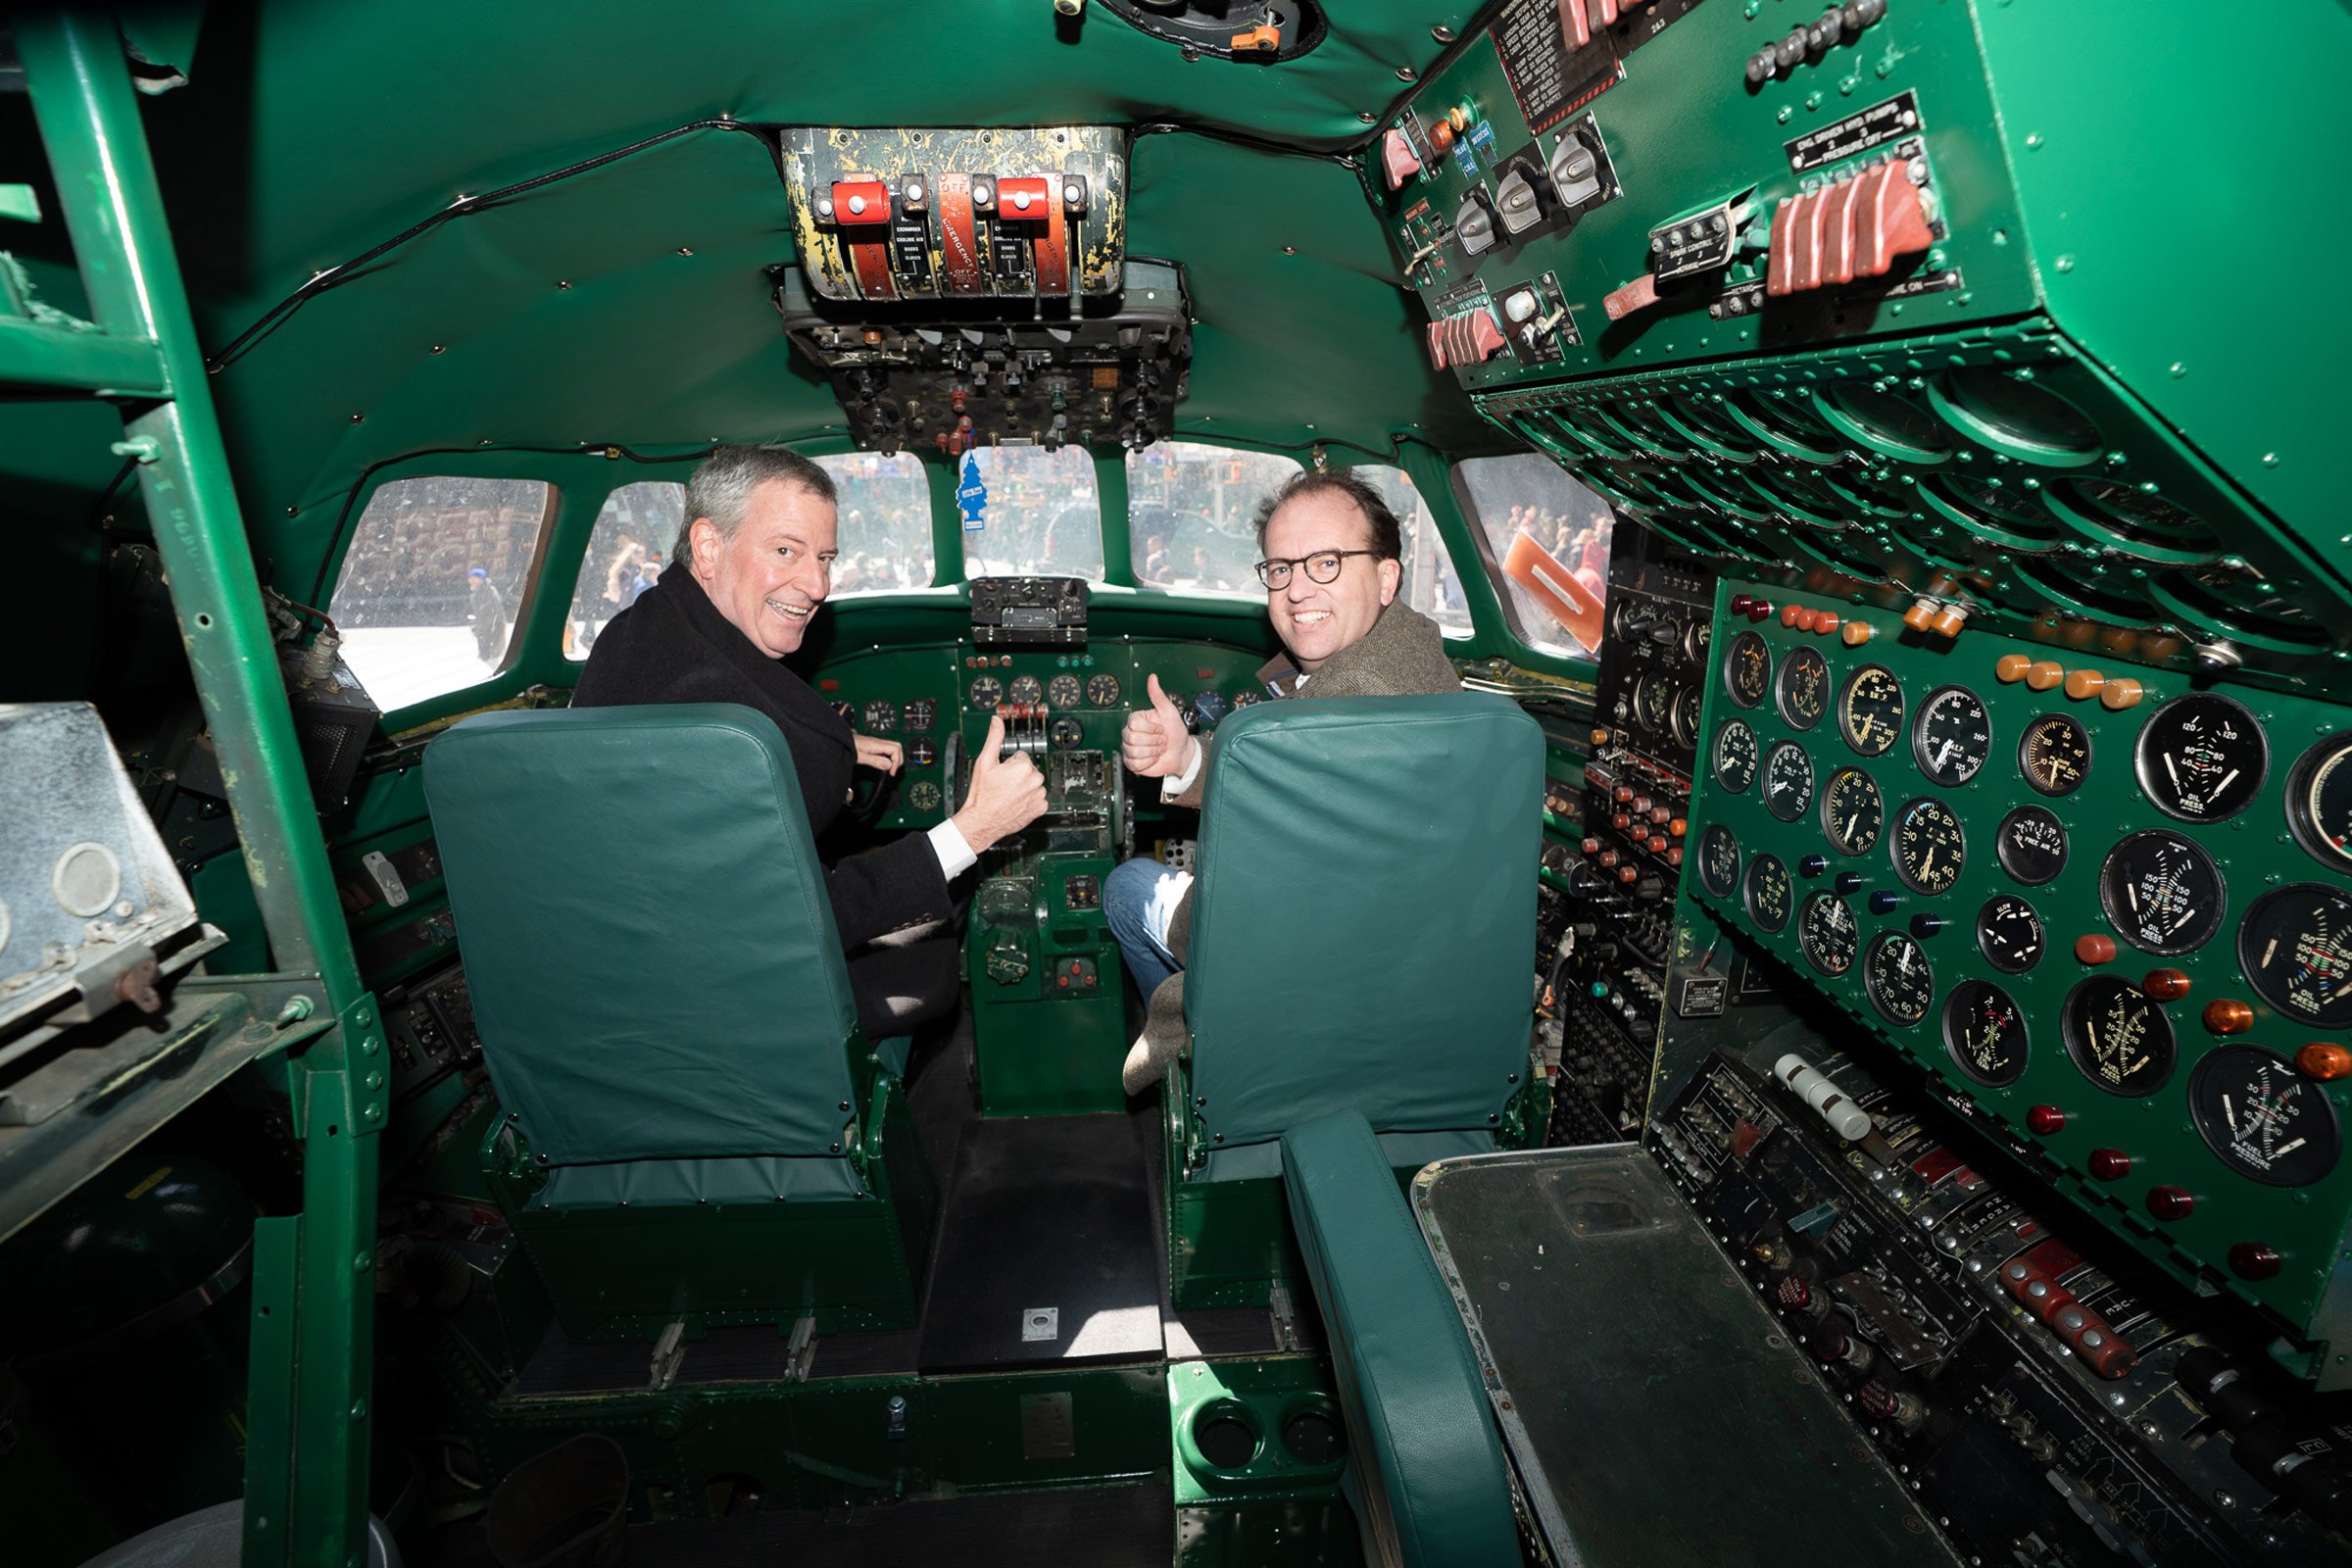 New York City Mayor Bill de Blasio (left) takes the controls in Connie’s cockpit with CEO and Managing Partner of MCR and MORSE Development Tyler Morse on March 23, 2019.